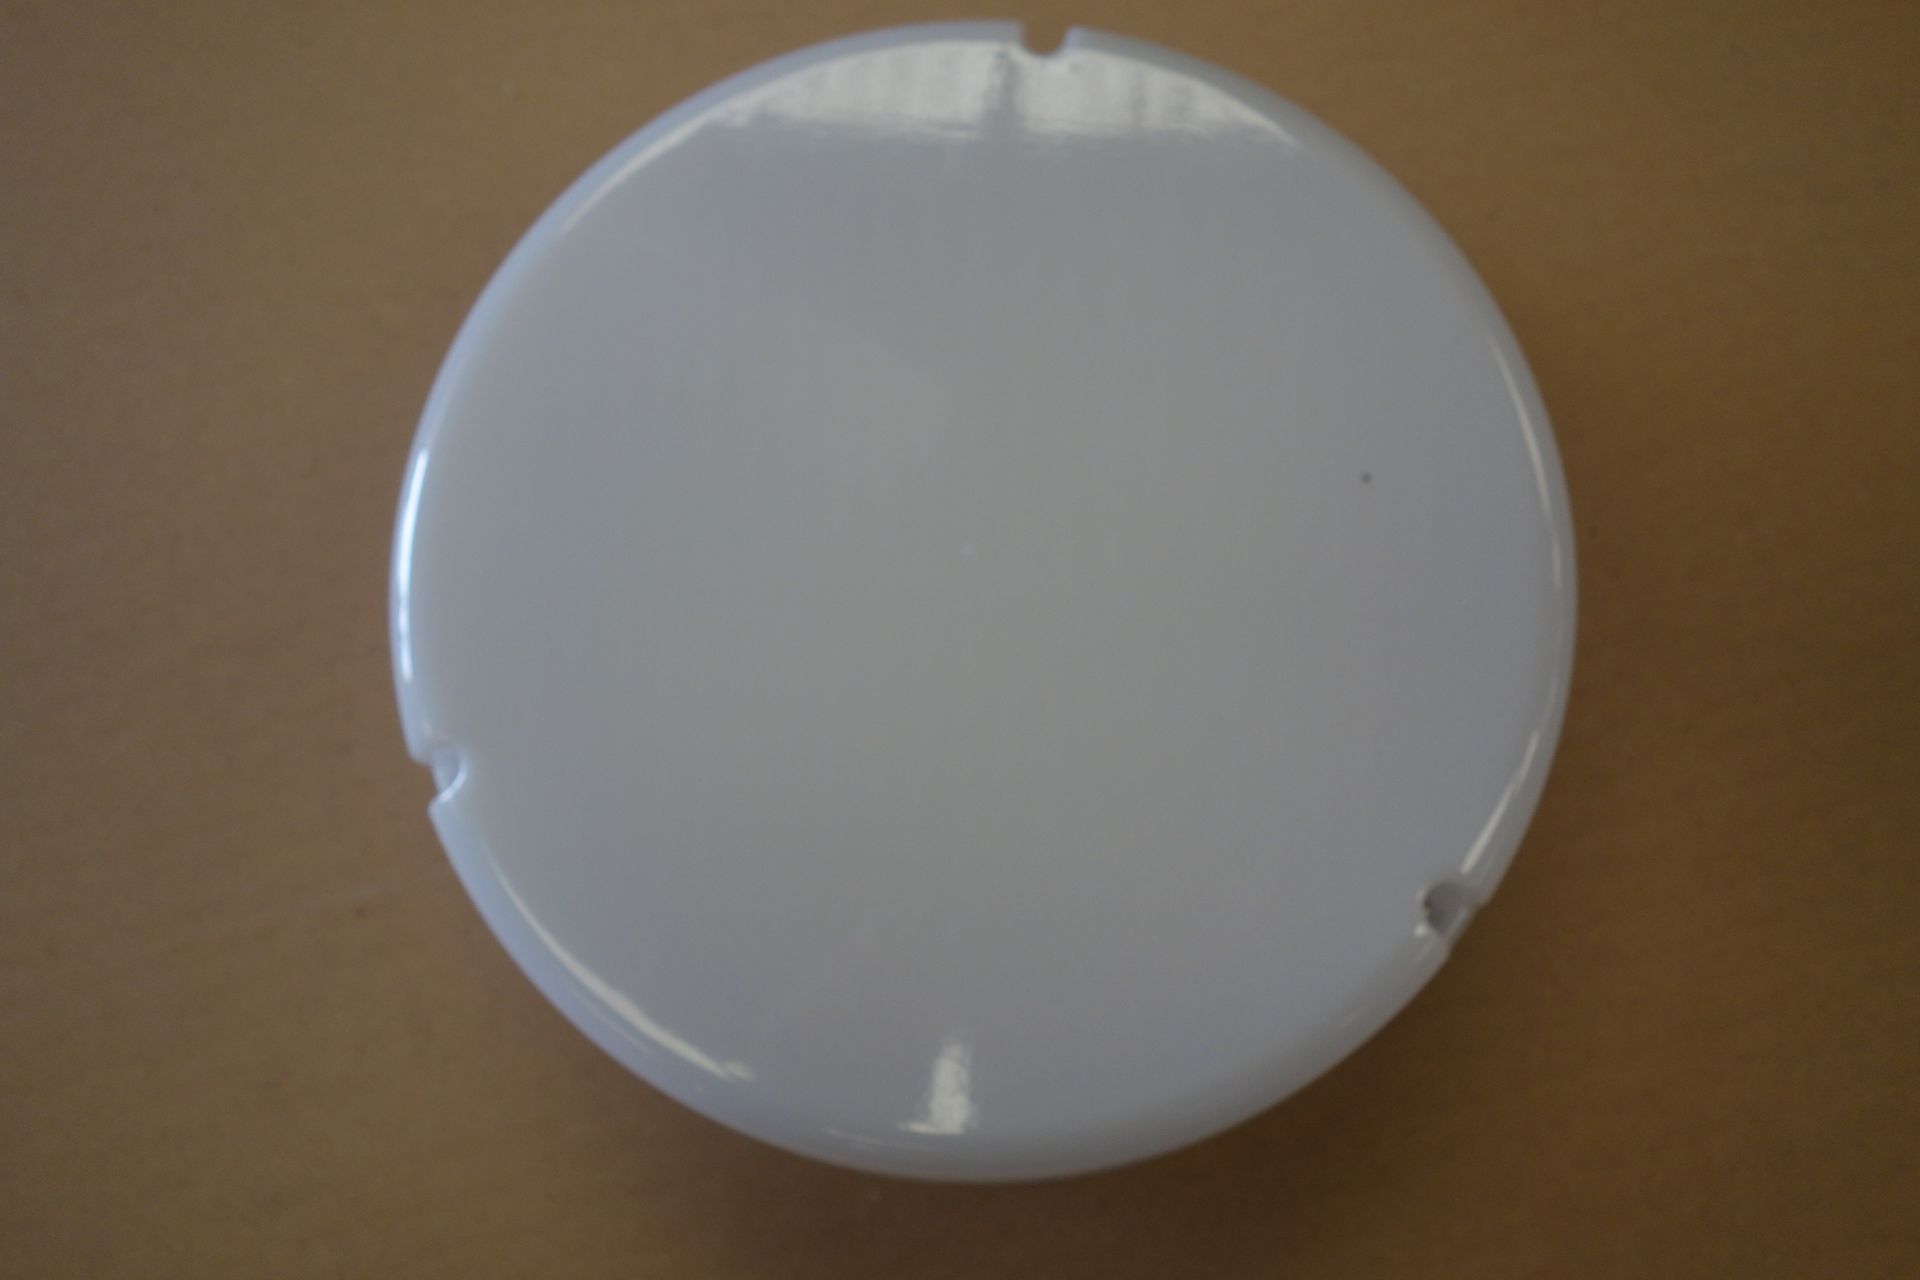 24 X Robus RC100DR0-01 100W GLS Circular Drum Fitting White Bace Opal Diffuser Lamp Not Inc: